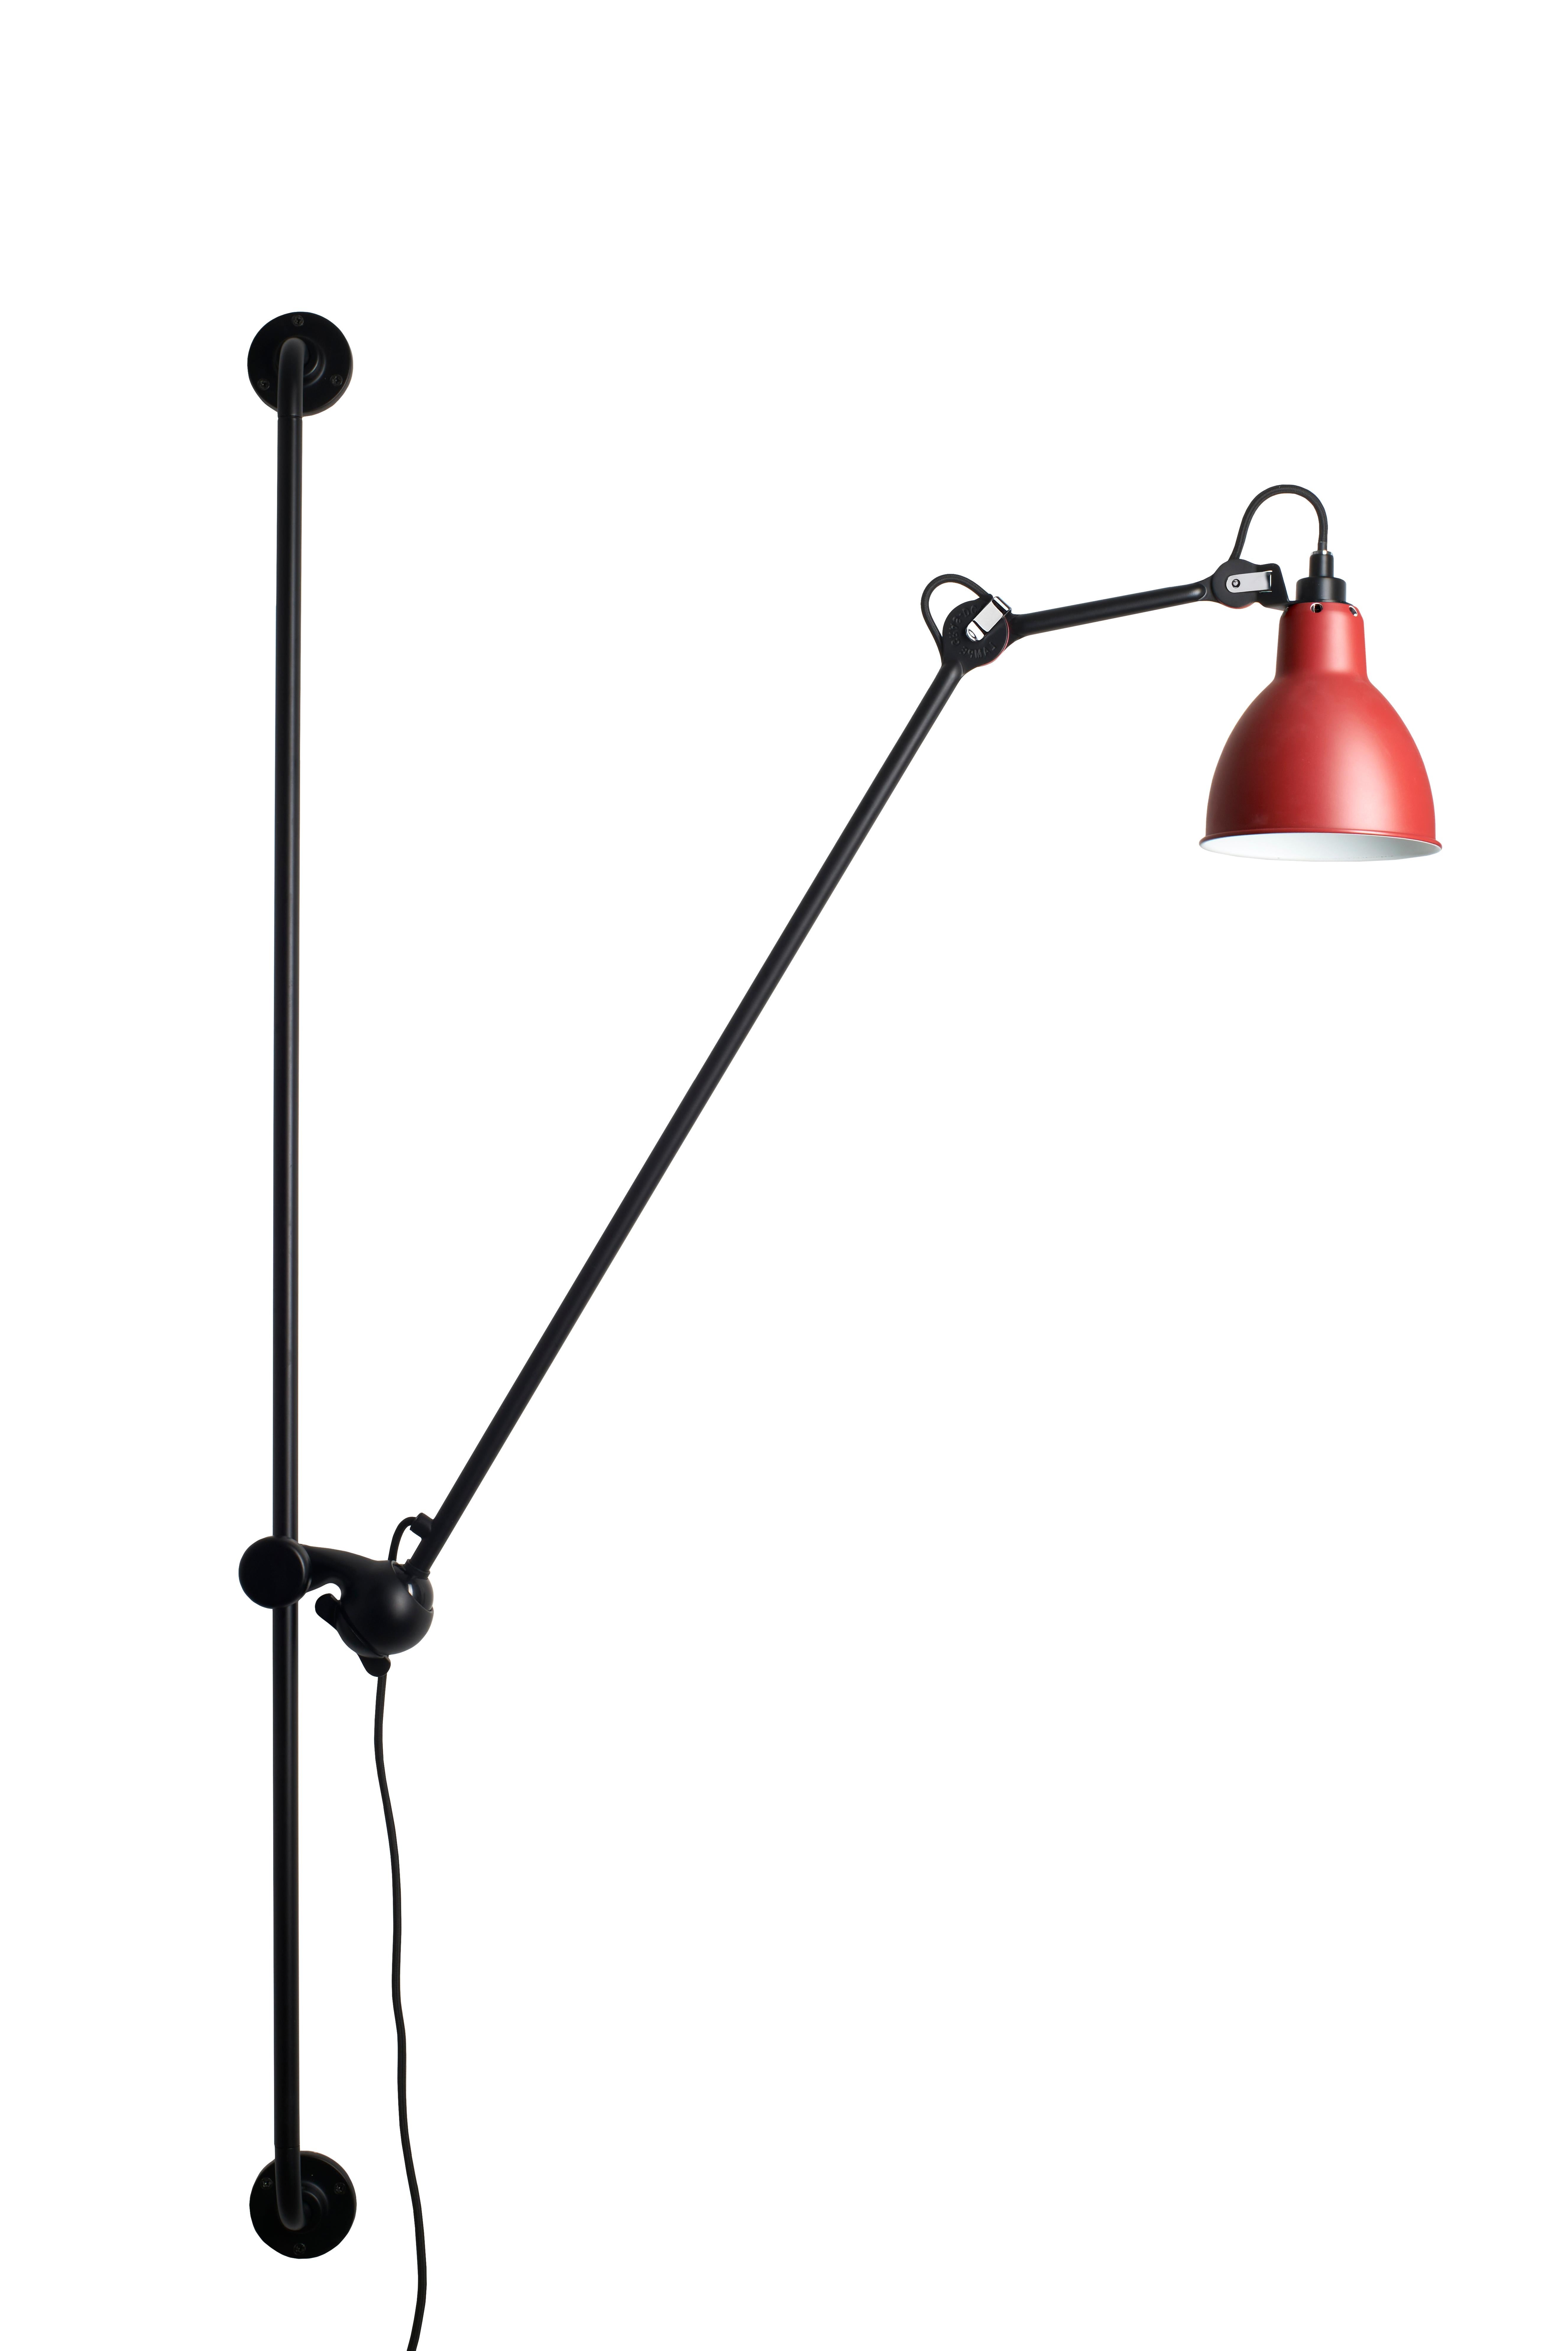 DCW Editions La Lampe Gras N°214 Round Wall Lamp in Black Arm & Red Shade For Sale